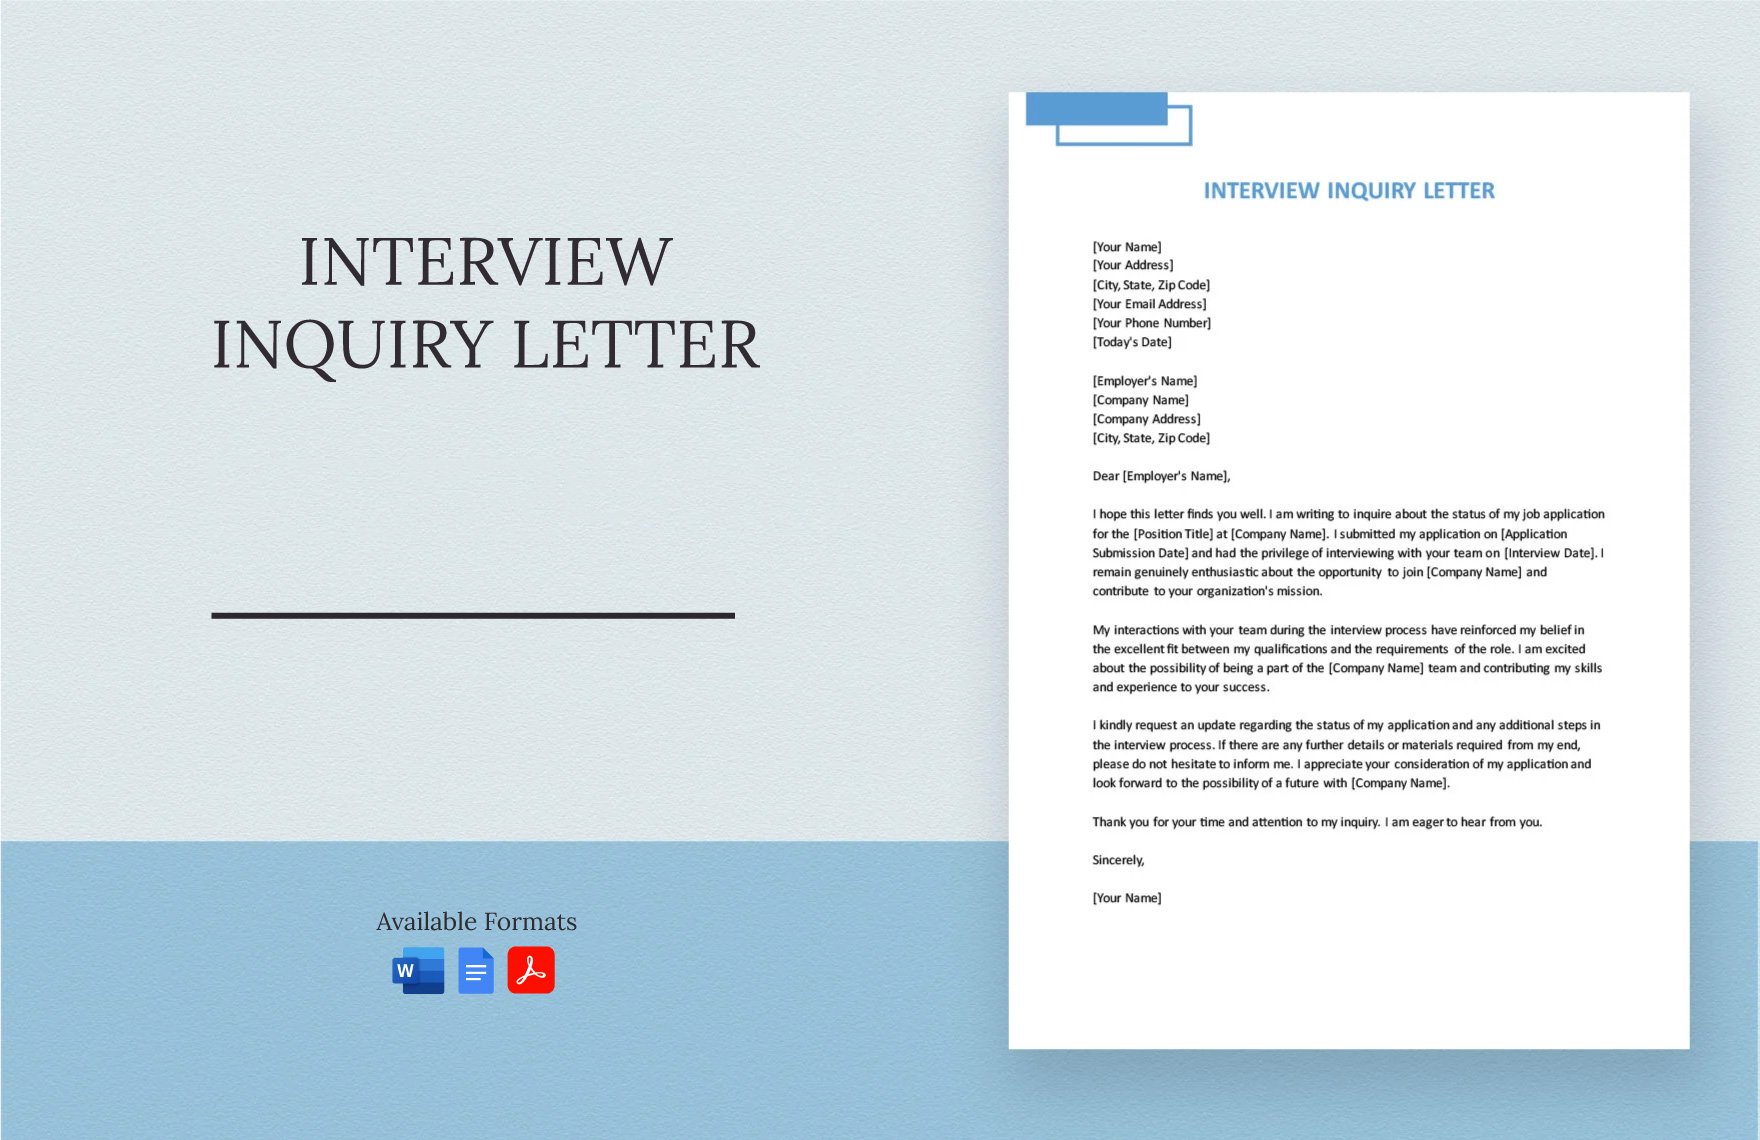 Interview Inquiry Letter